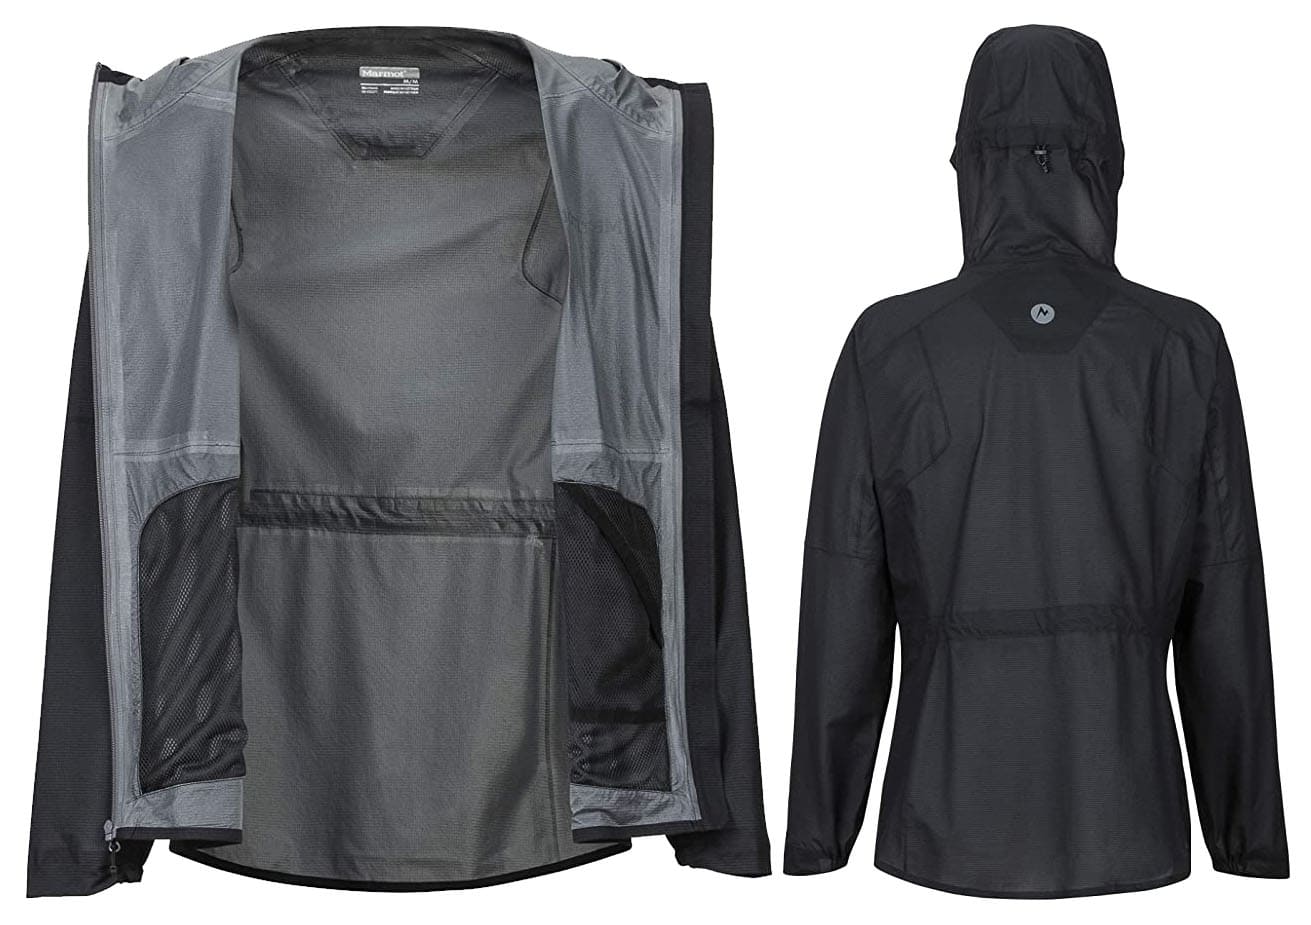 Although lightweight, it's packed with technical features to keep you dry and comfortable